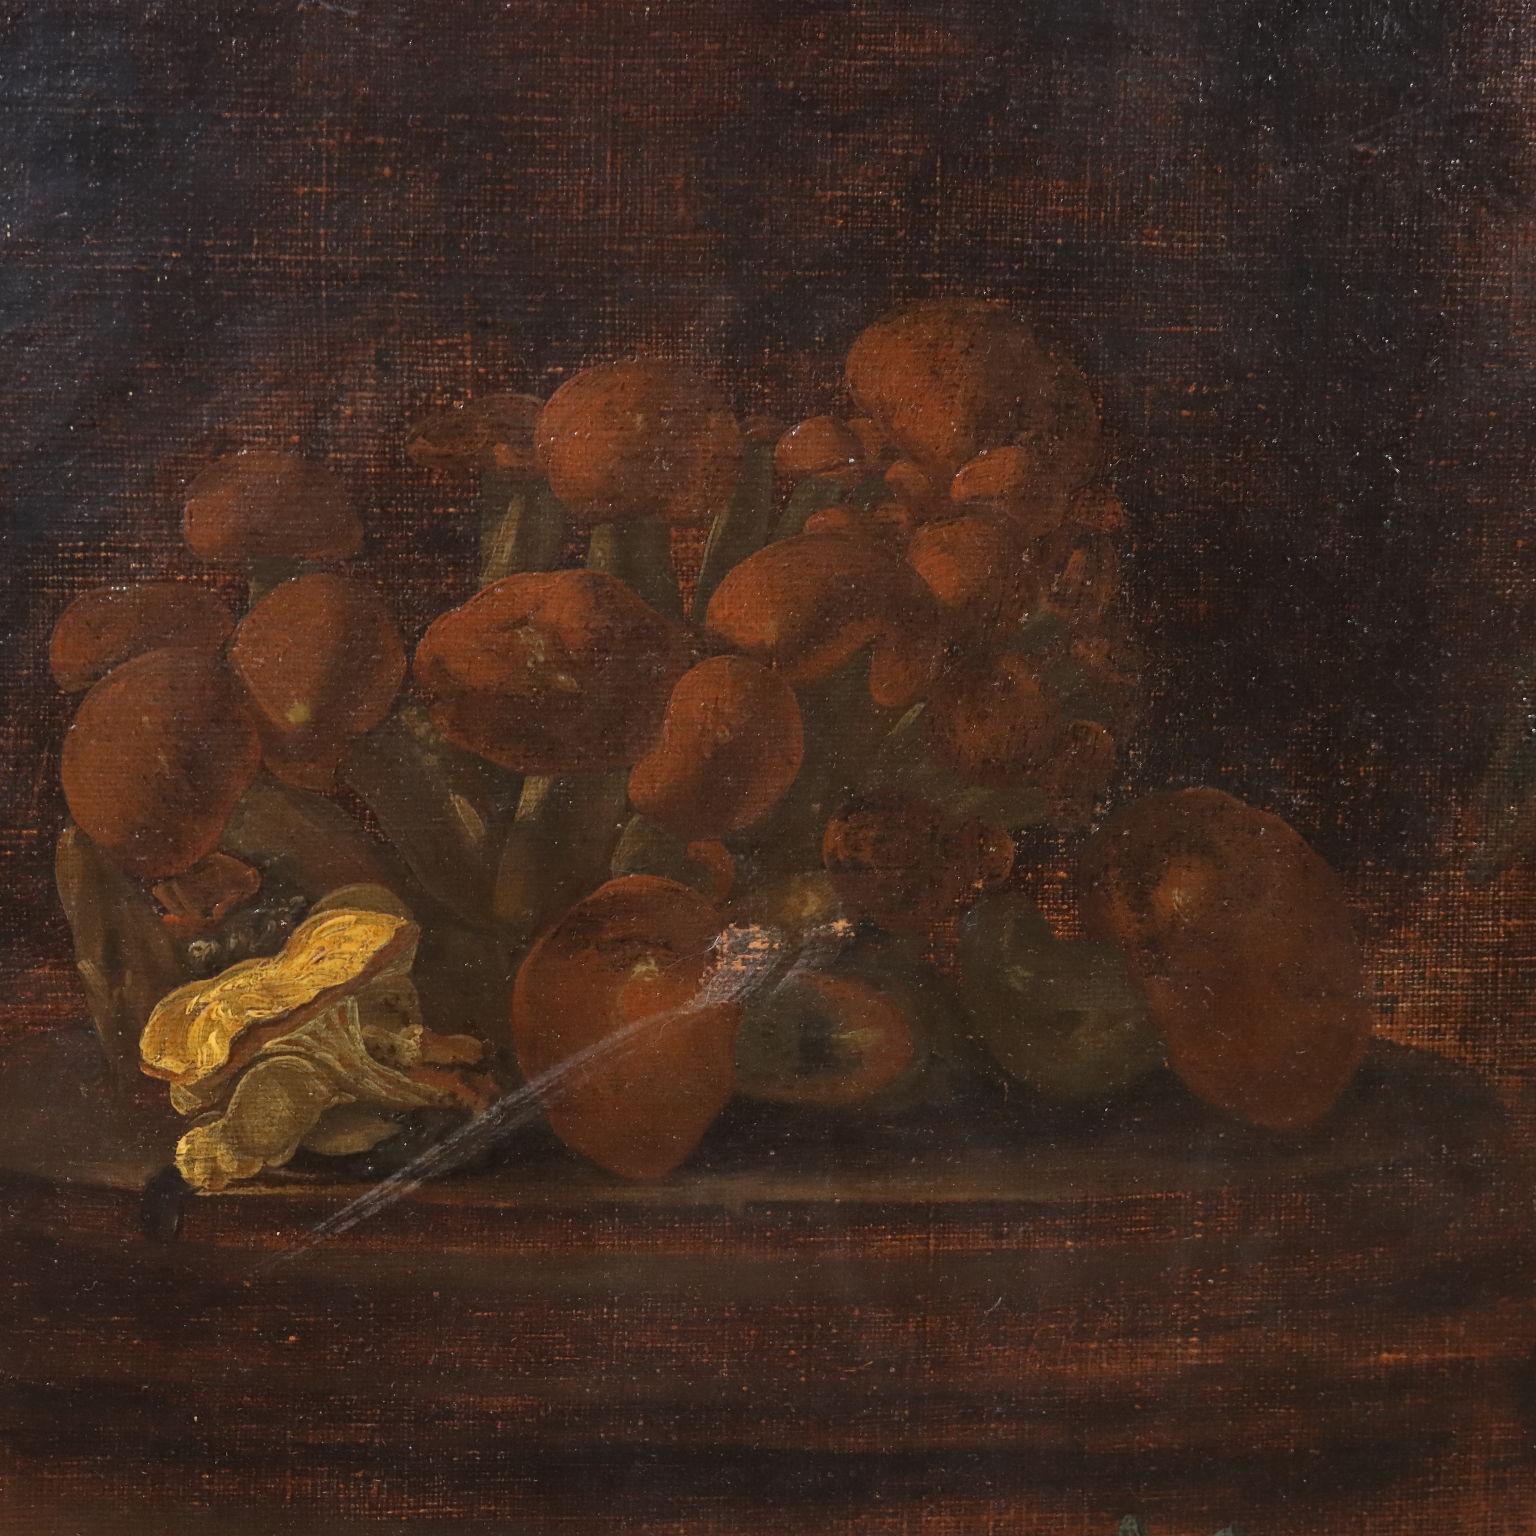 Still Life with Flowers, Grapes and Mushrooms, XVIIth - XVIIIth century - Black Still-Life Painting by Unknown